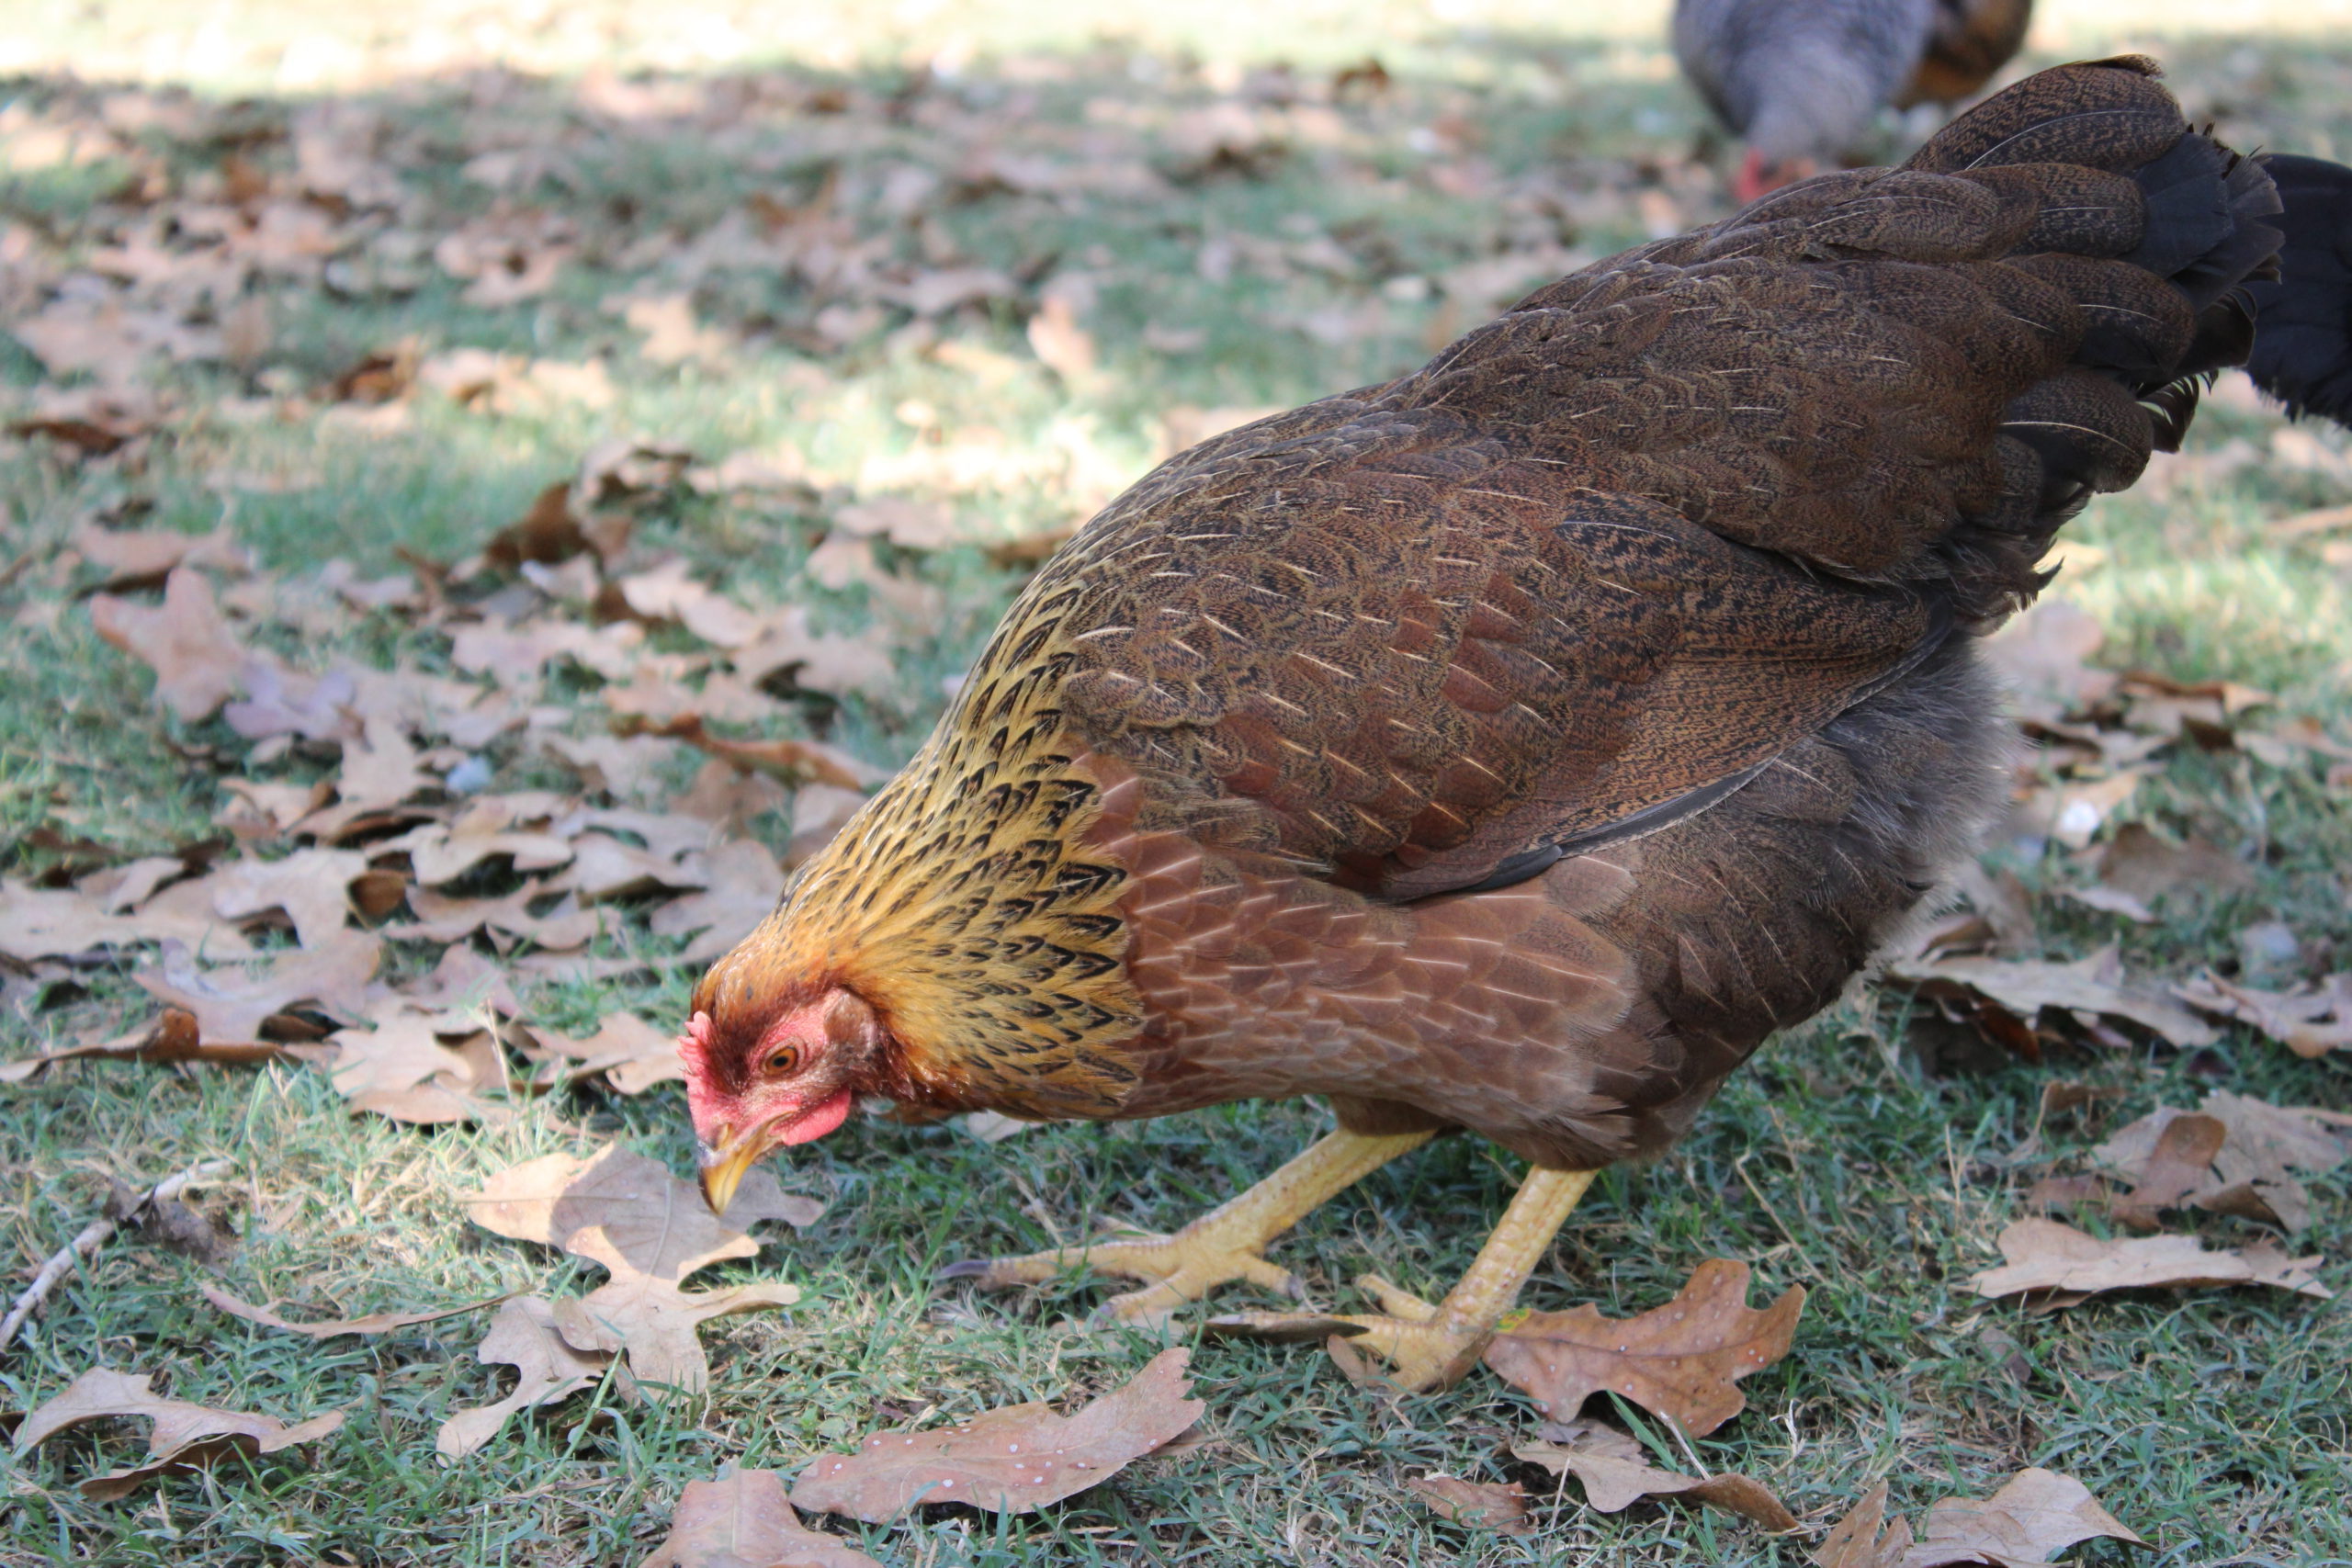 Choosing the Best Chicken Breed for Your Flock - 20 Most Popular Breeds